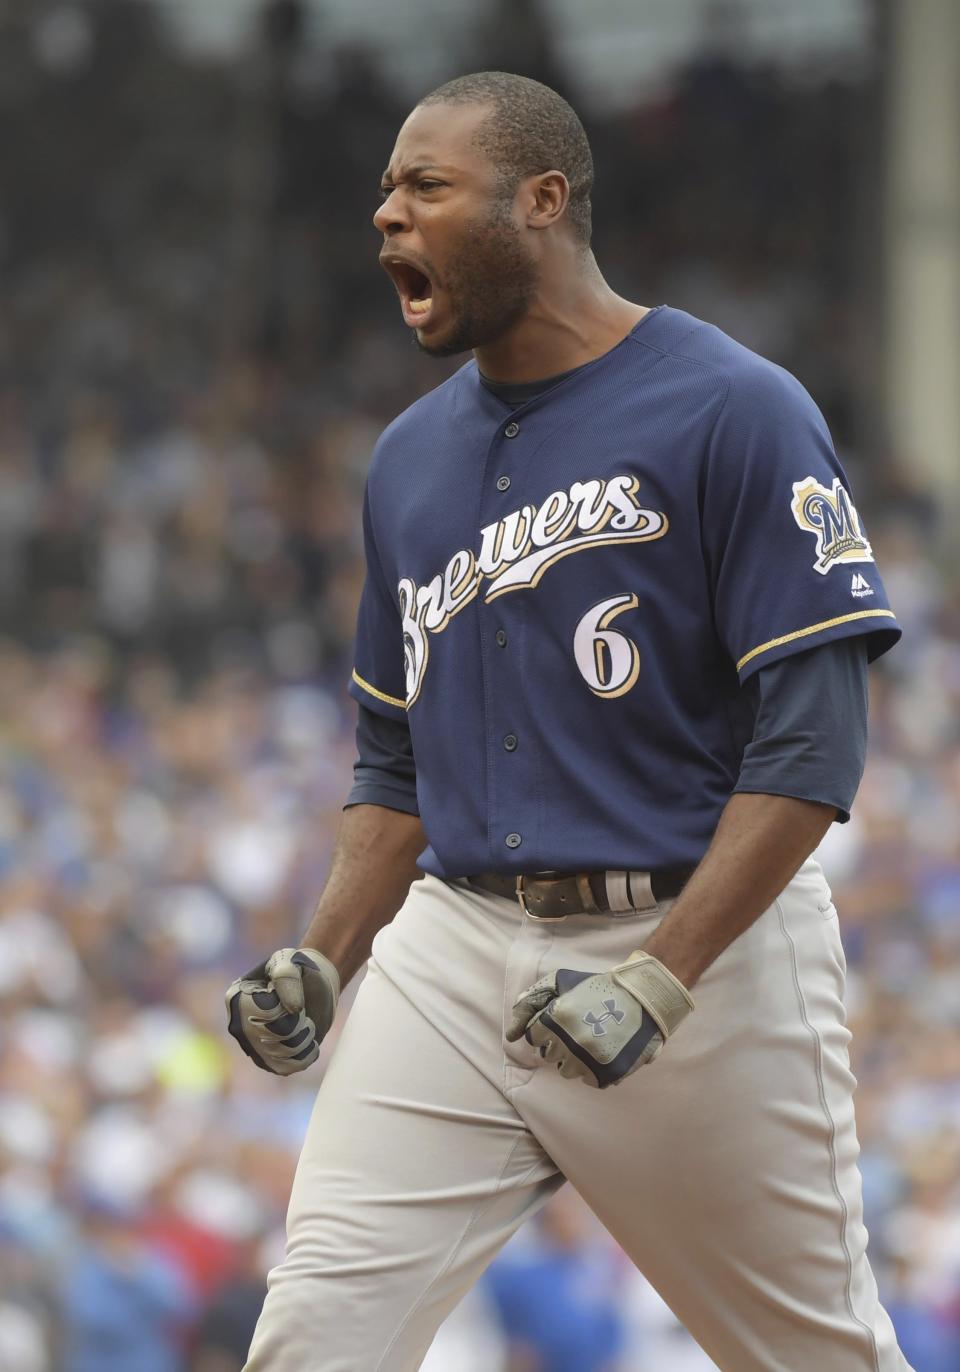 Milwaukee Brewers' Lorenzo Cain reacts to his RBI single in the eighth inning of a tiebreak baseball game against the Chicago Cubs on Monday, Oct. 1, 2018, in Chicago. (John Starks/Daily Herald via AP)